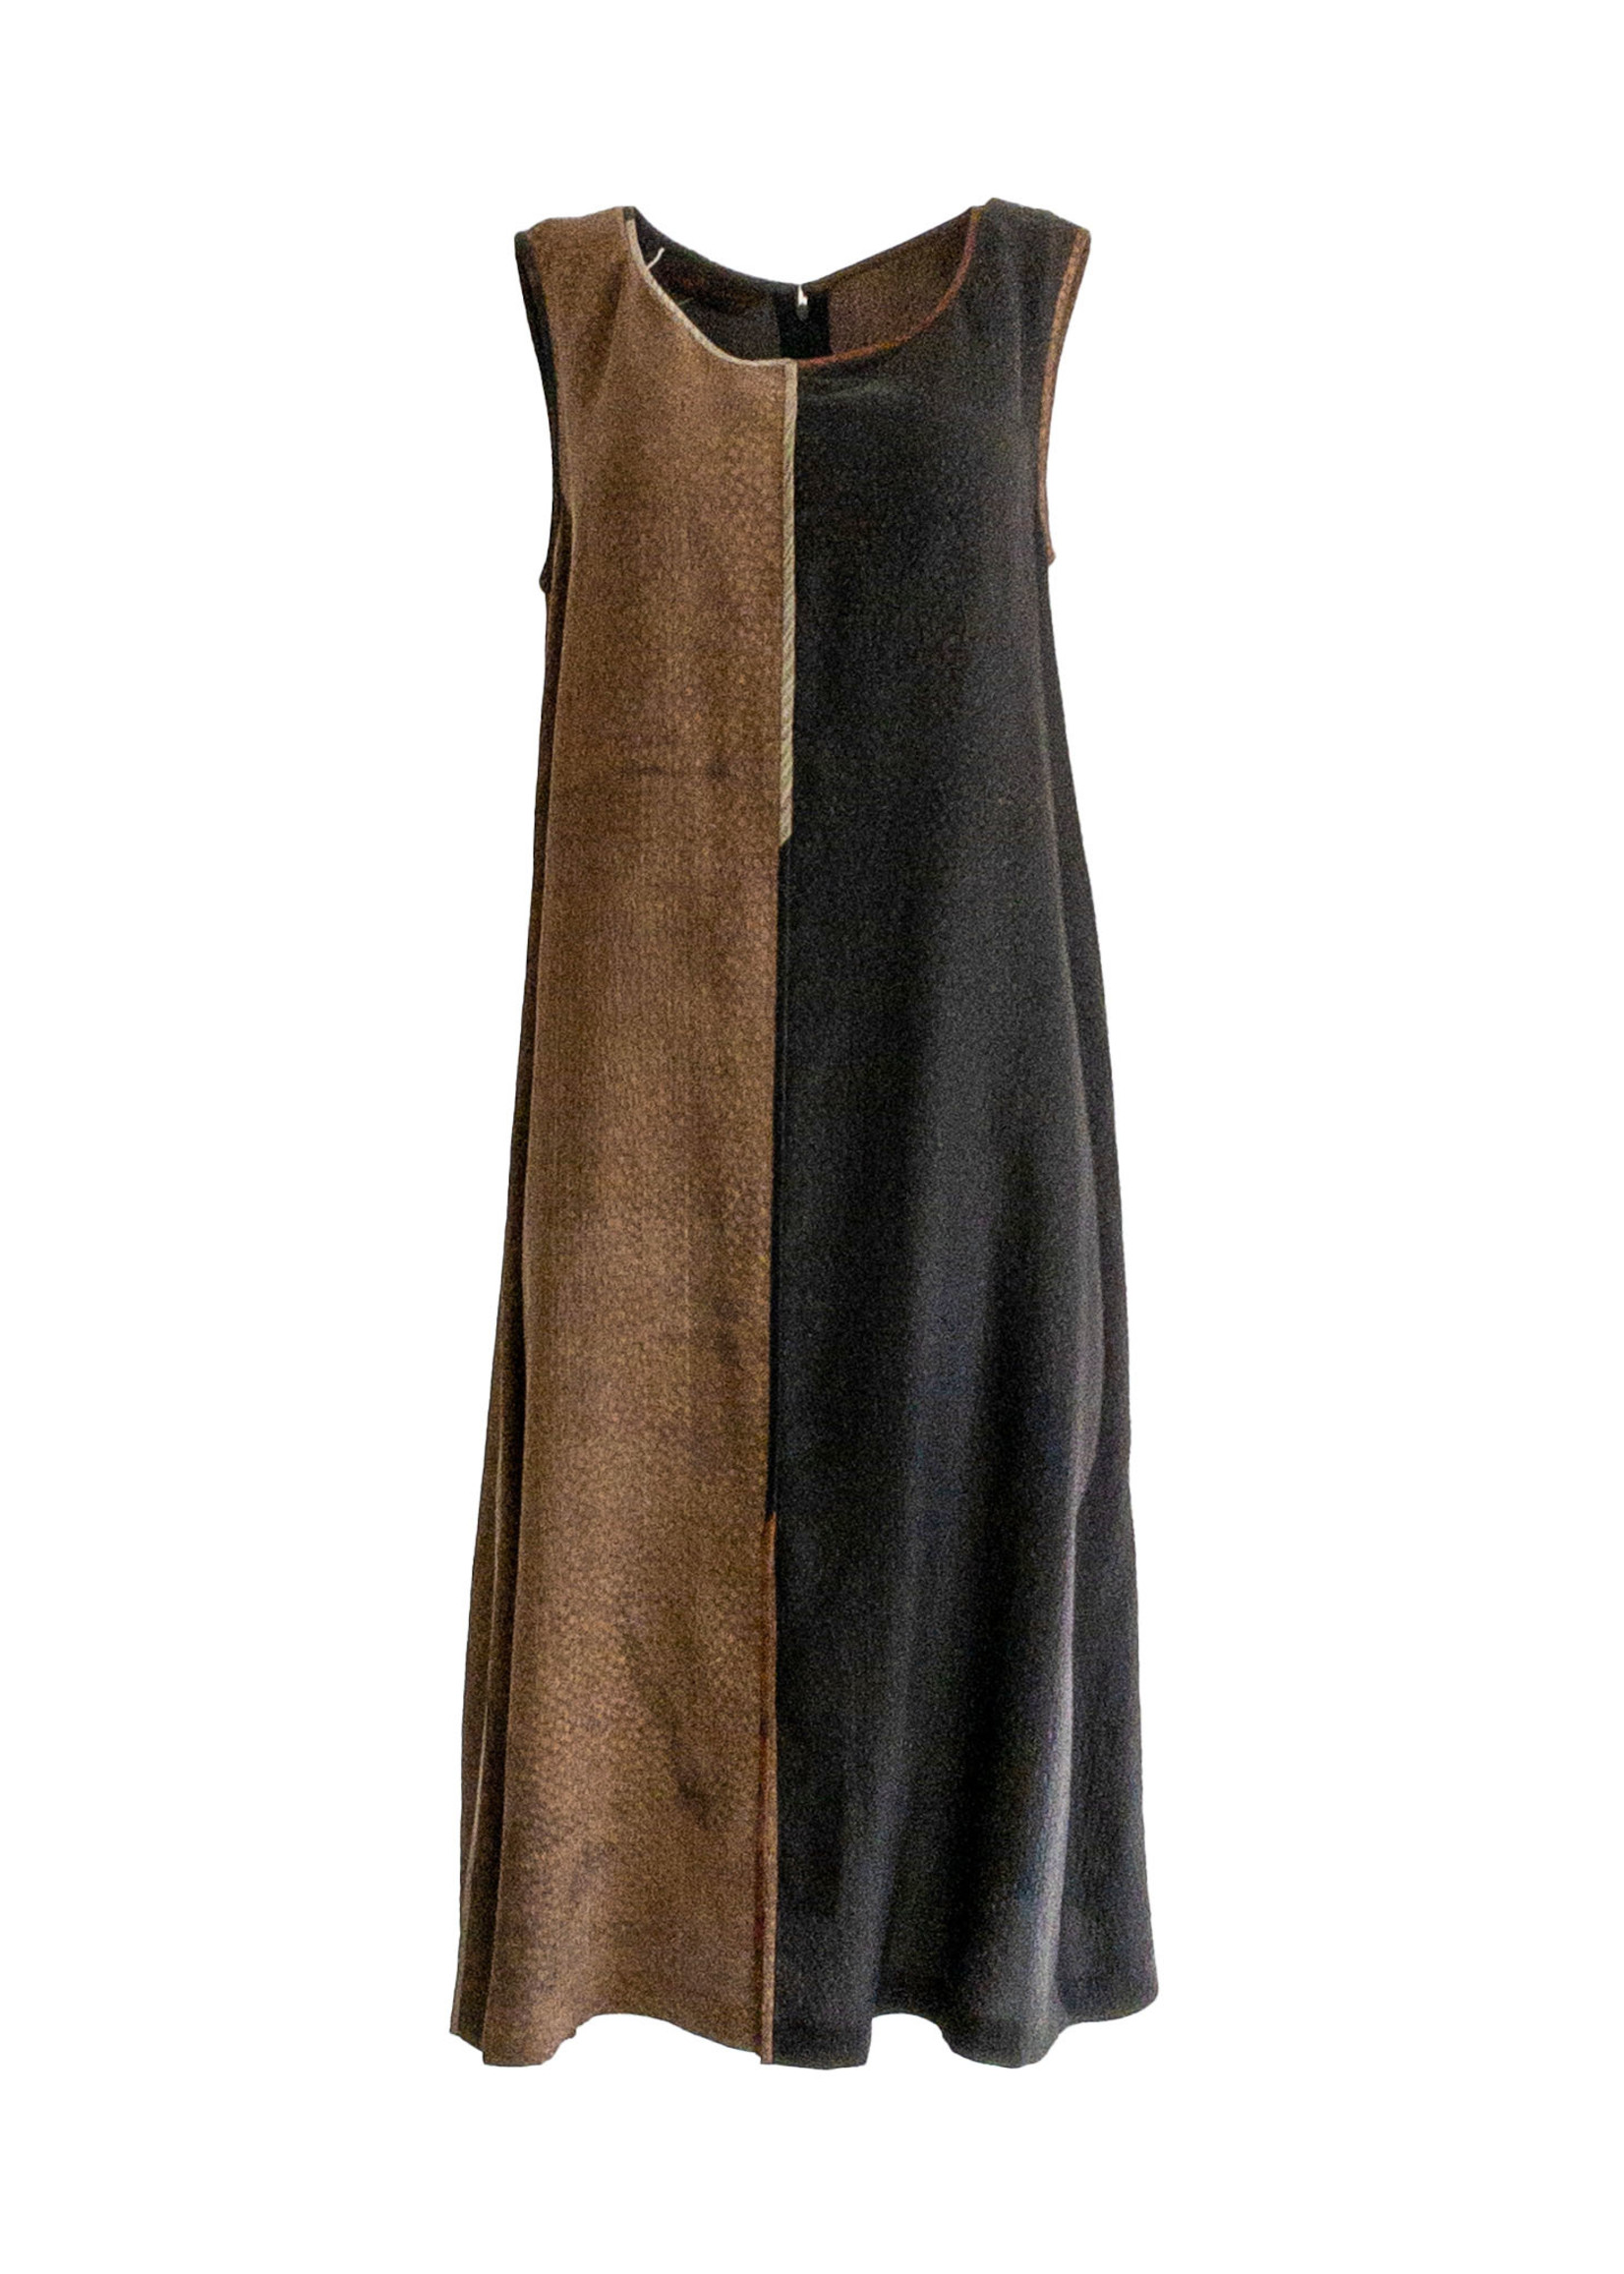 SOPHIE HONG Silk Two-Toned Dress